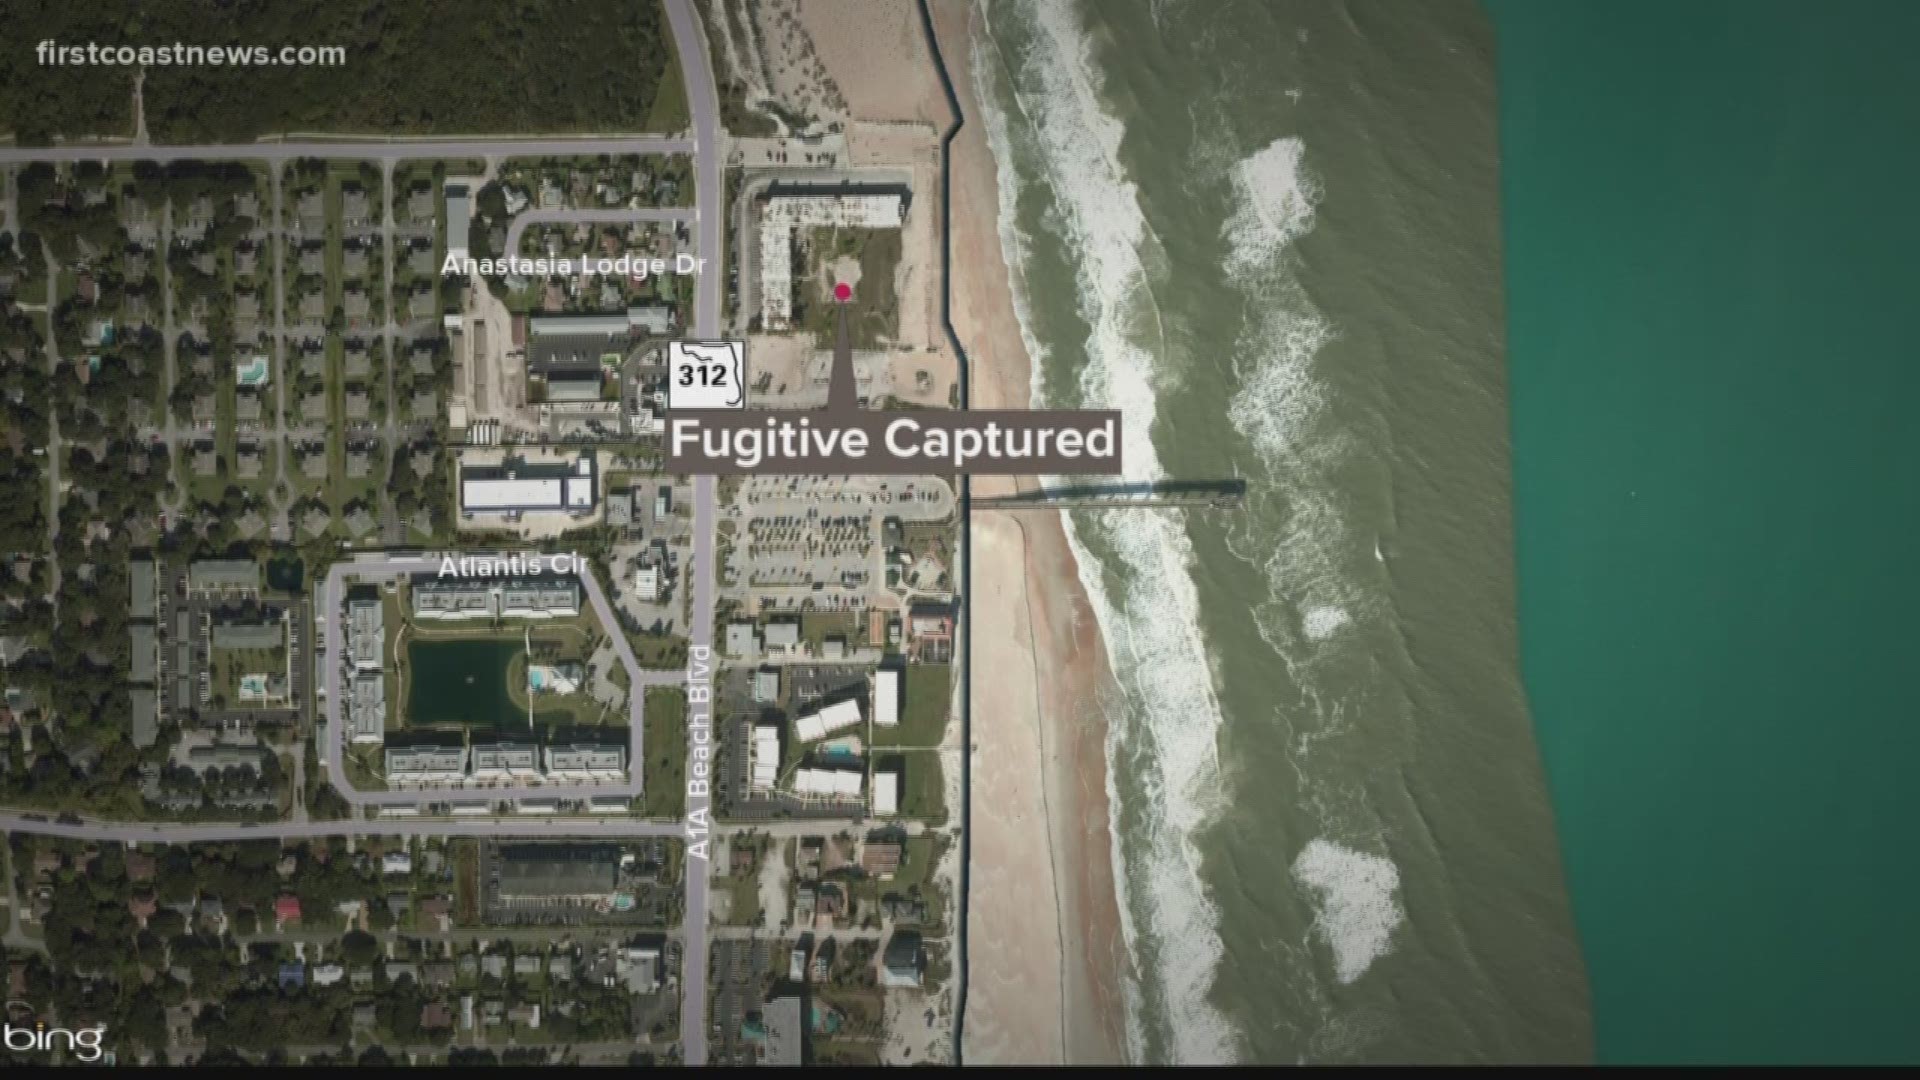 The U.S. Marshals Service went to the St. Augustine Beach Pier in response to reports of a federal fugitive in the area.